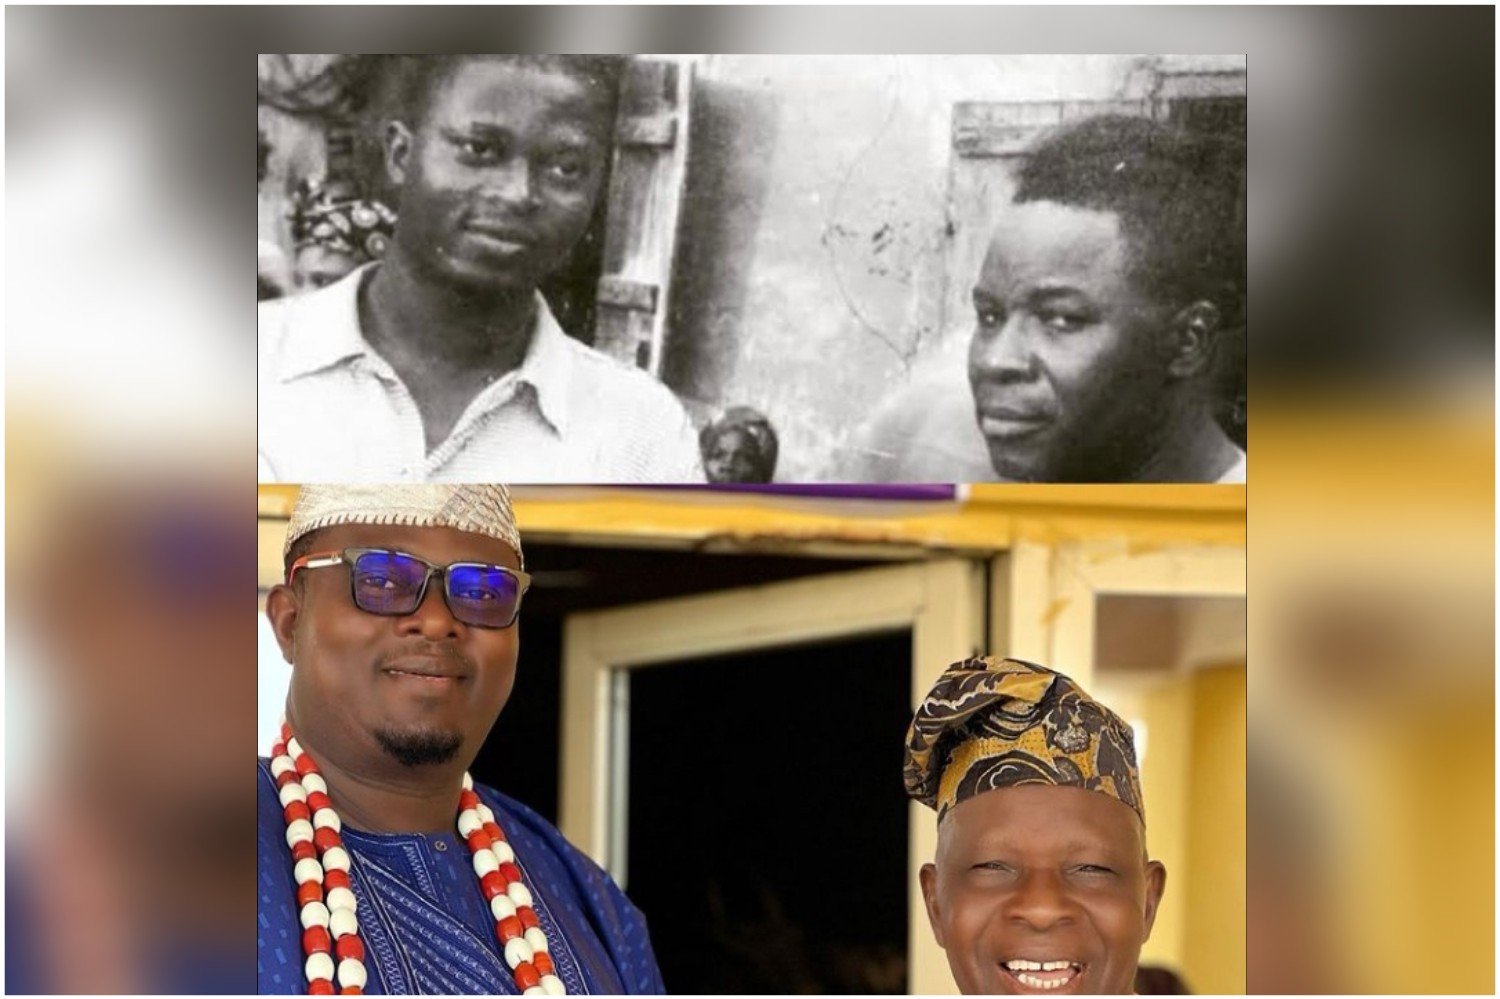 “It’s been so tough,and sweet” – Muyiwa Ademola reacts to throwback photo of himself and veteran actor Baba Wande